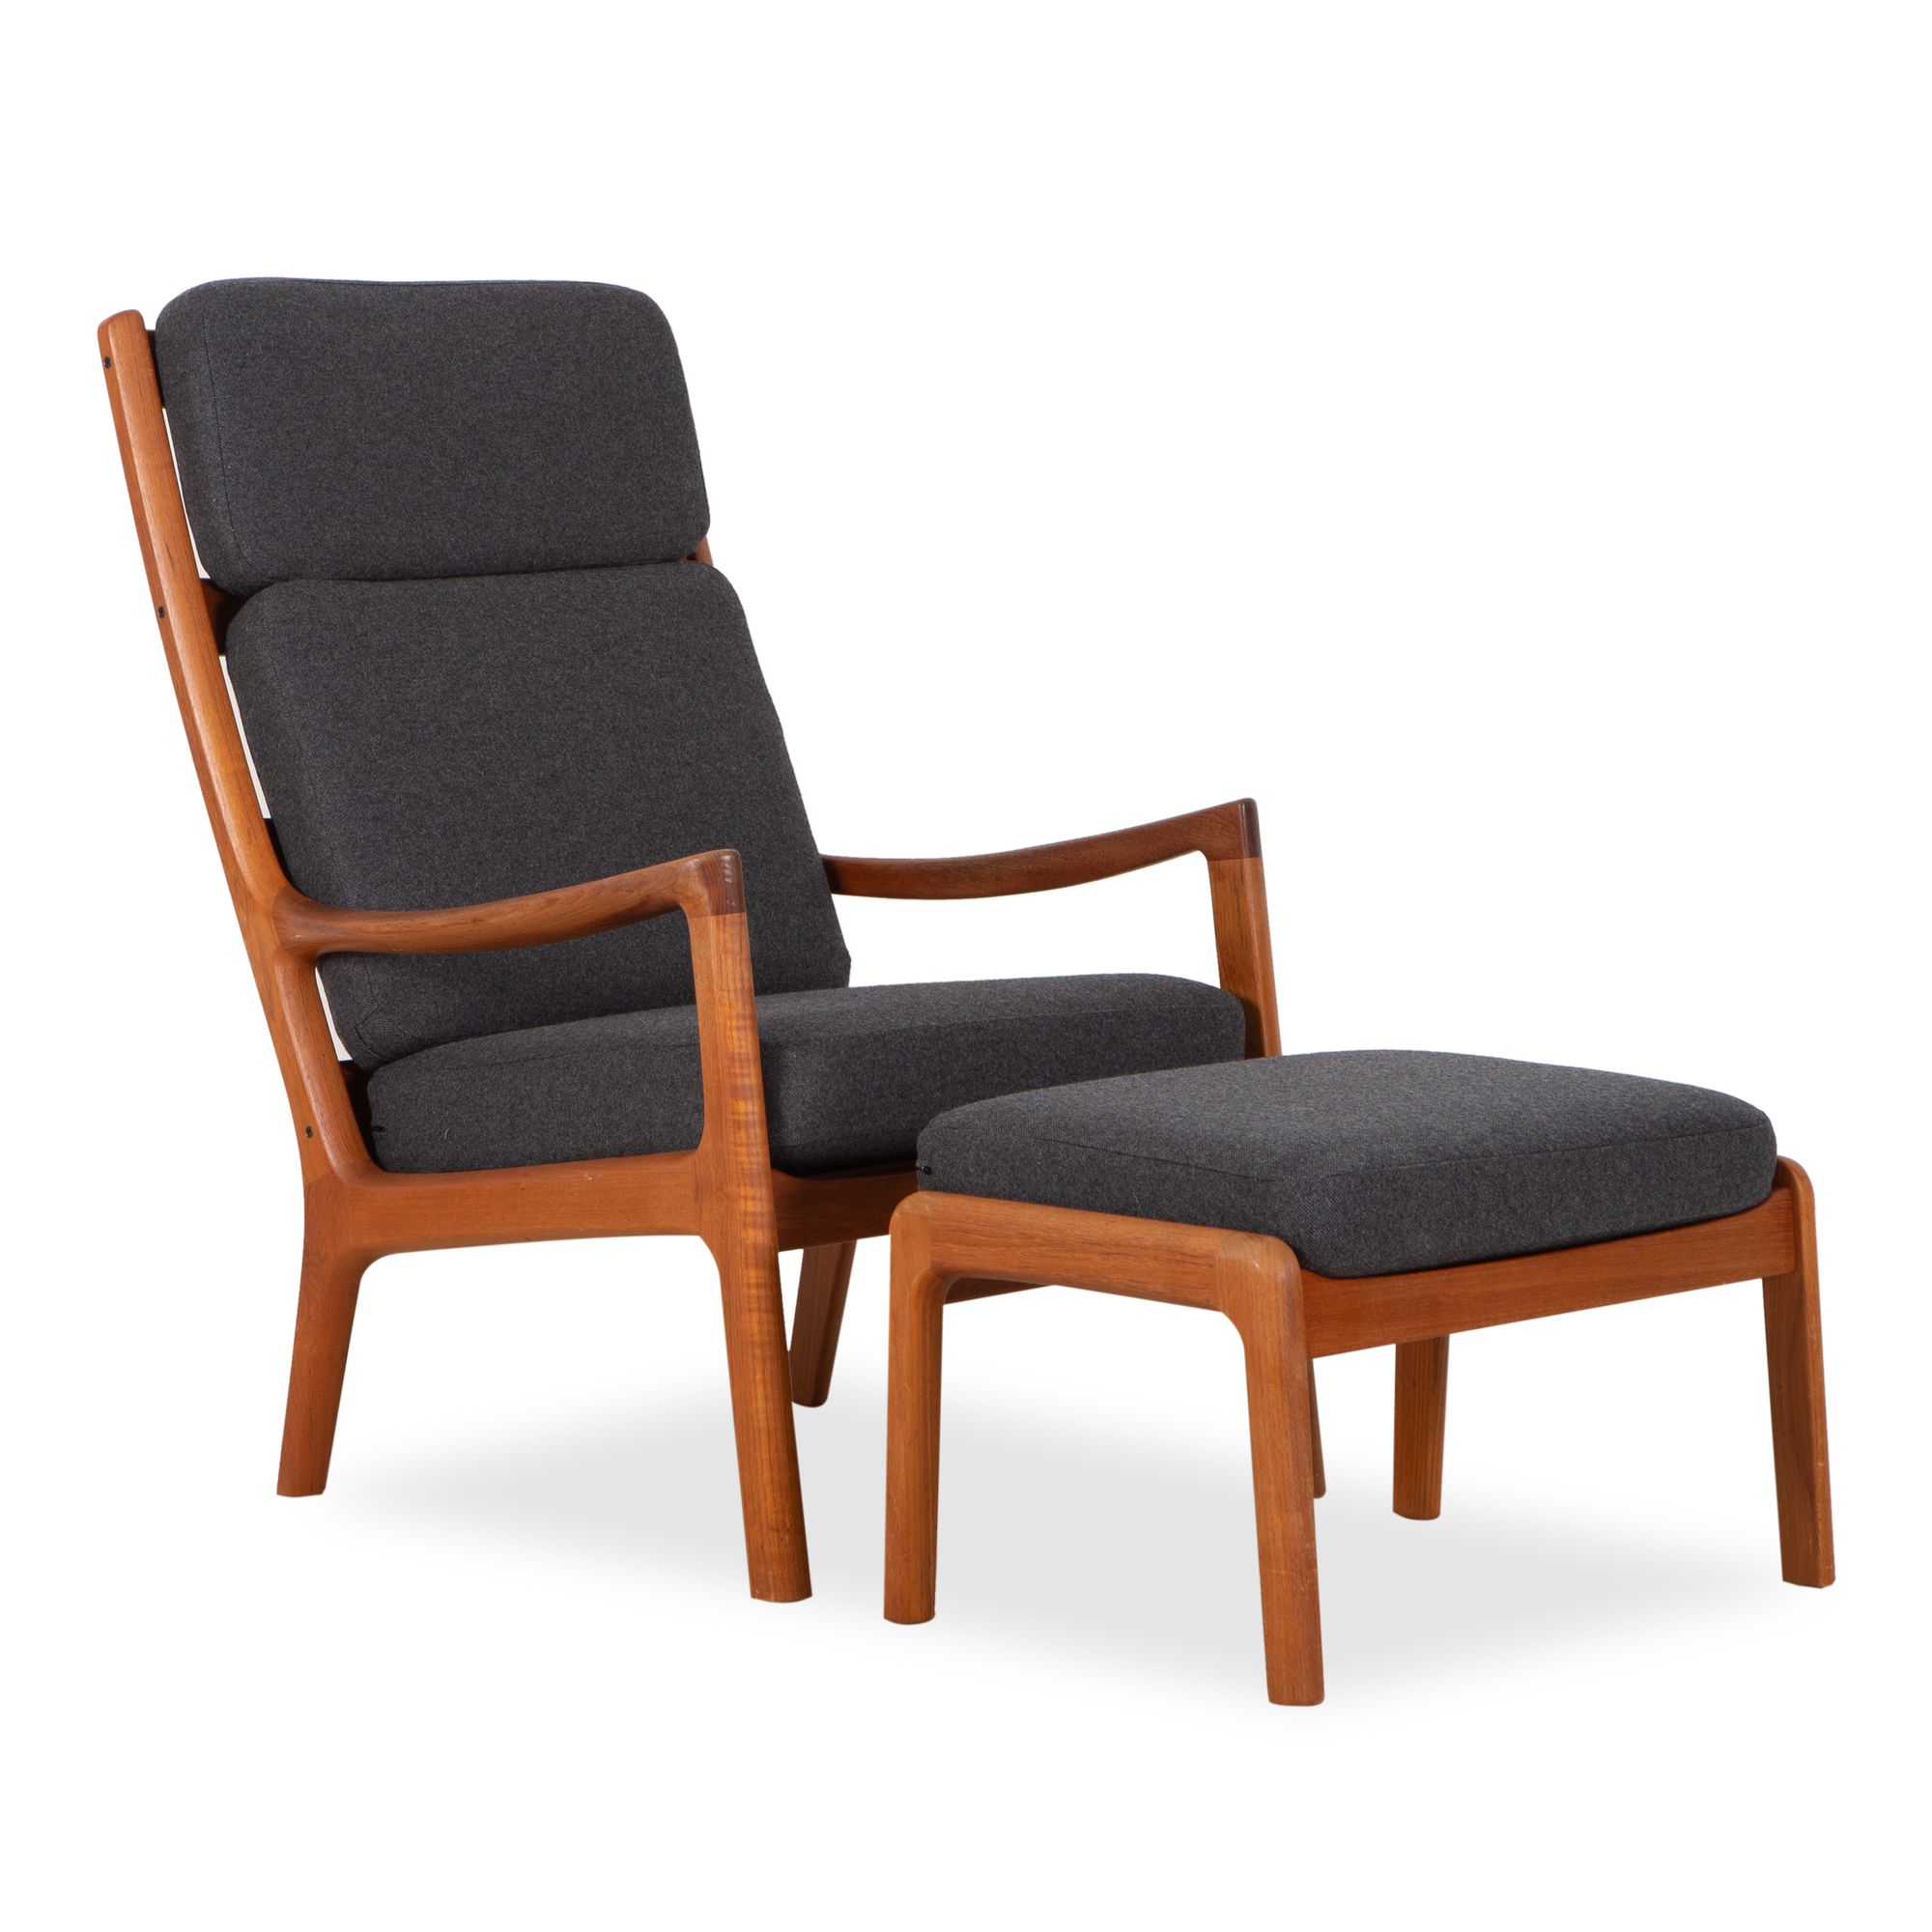 The epitome of a mid-century modern lounge chair, this vintage Senator Easy Chair and matching stool was designed by Ole Wanscher and manufactured by France & Søn, circa 1960s